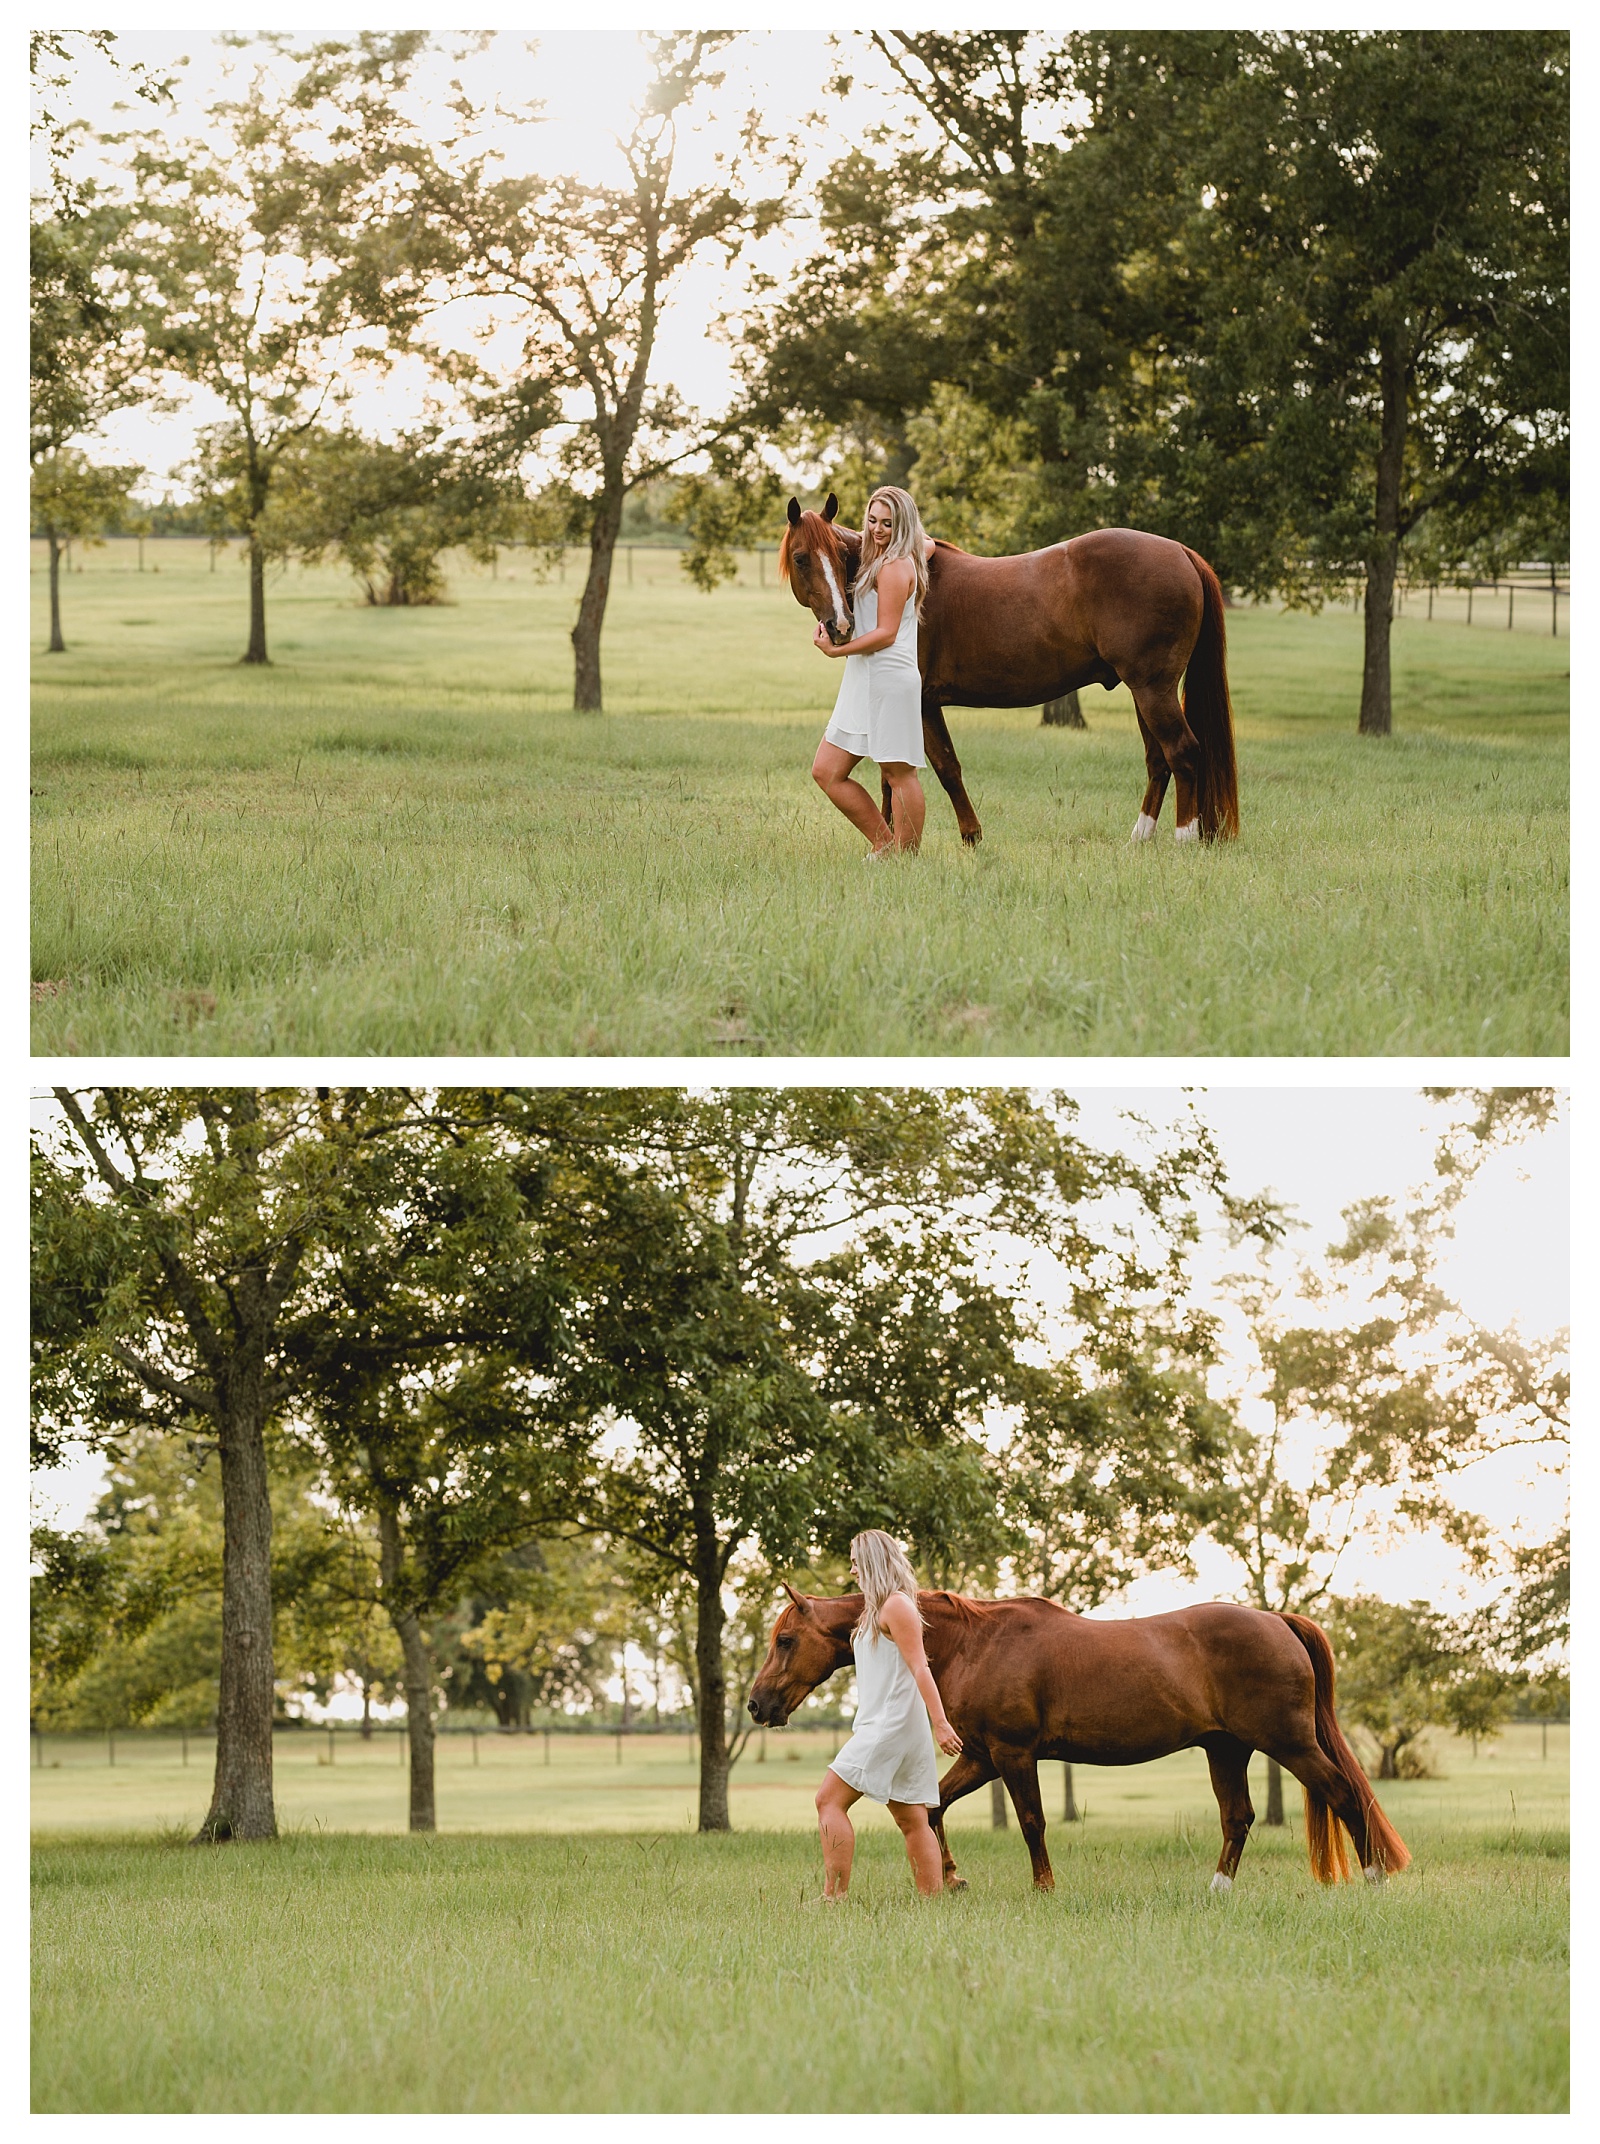 Equine professional pictures. Photographer Shelly Williams located in North Florida.